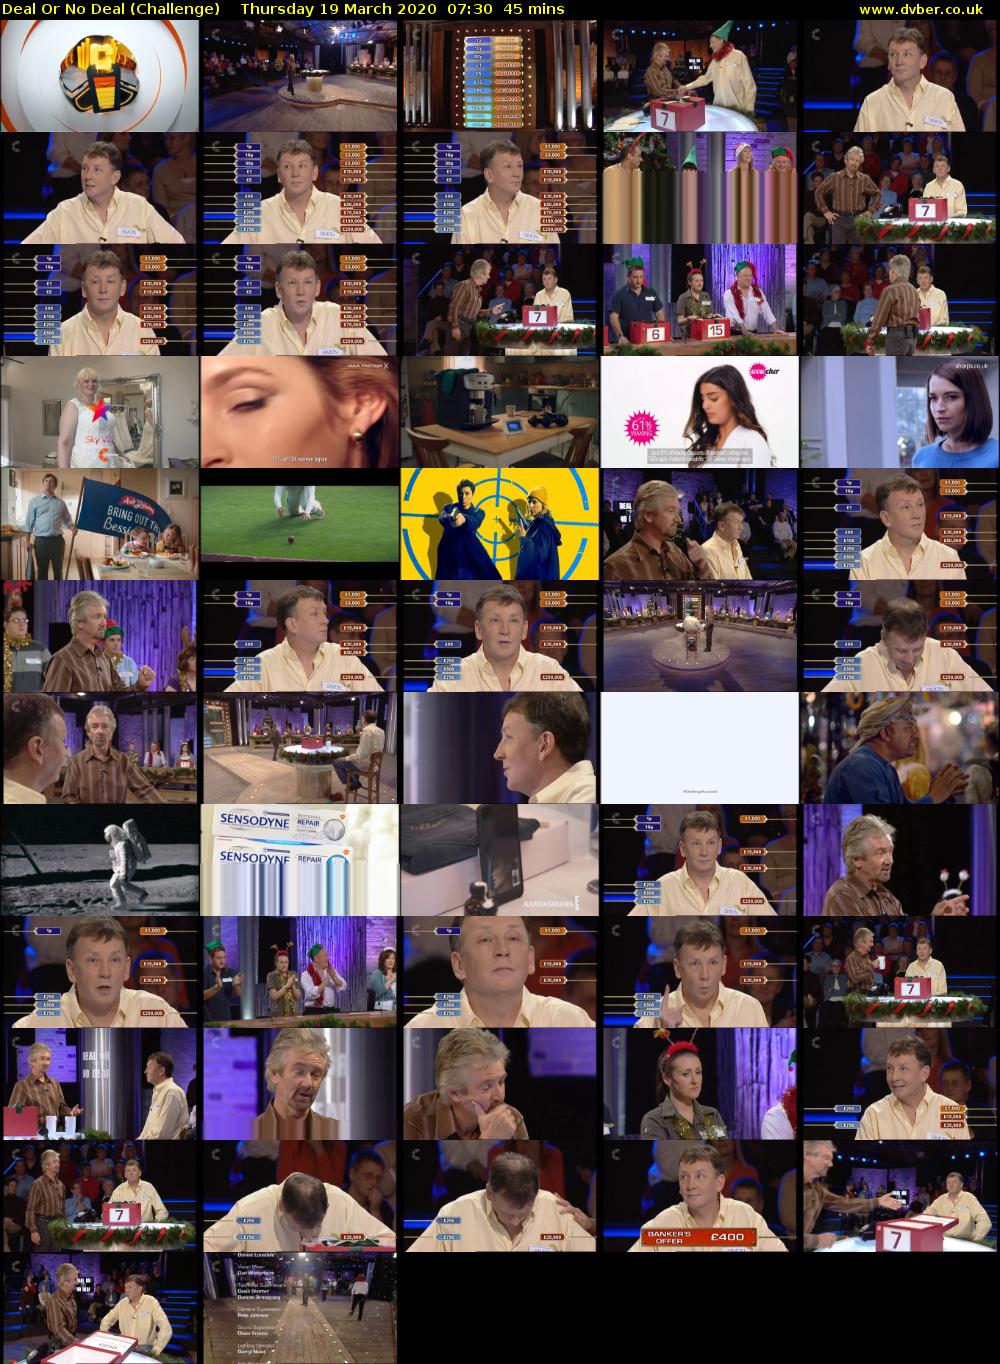 Deal Or No Deal (Challenge) Thursday 19 March 2020 07:30 - 08:15